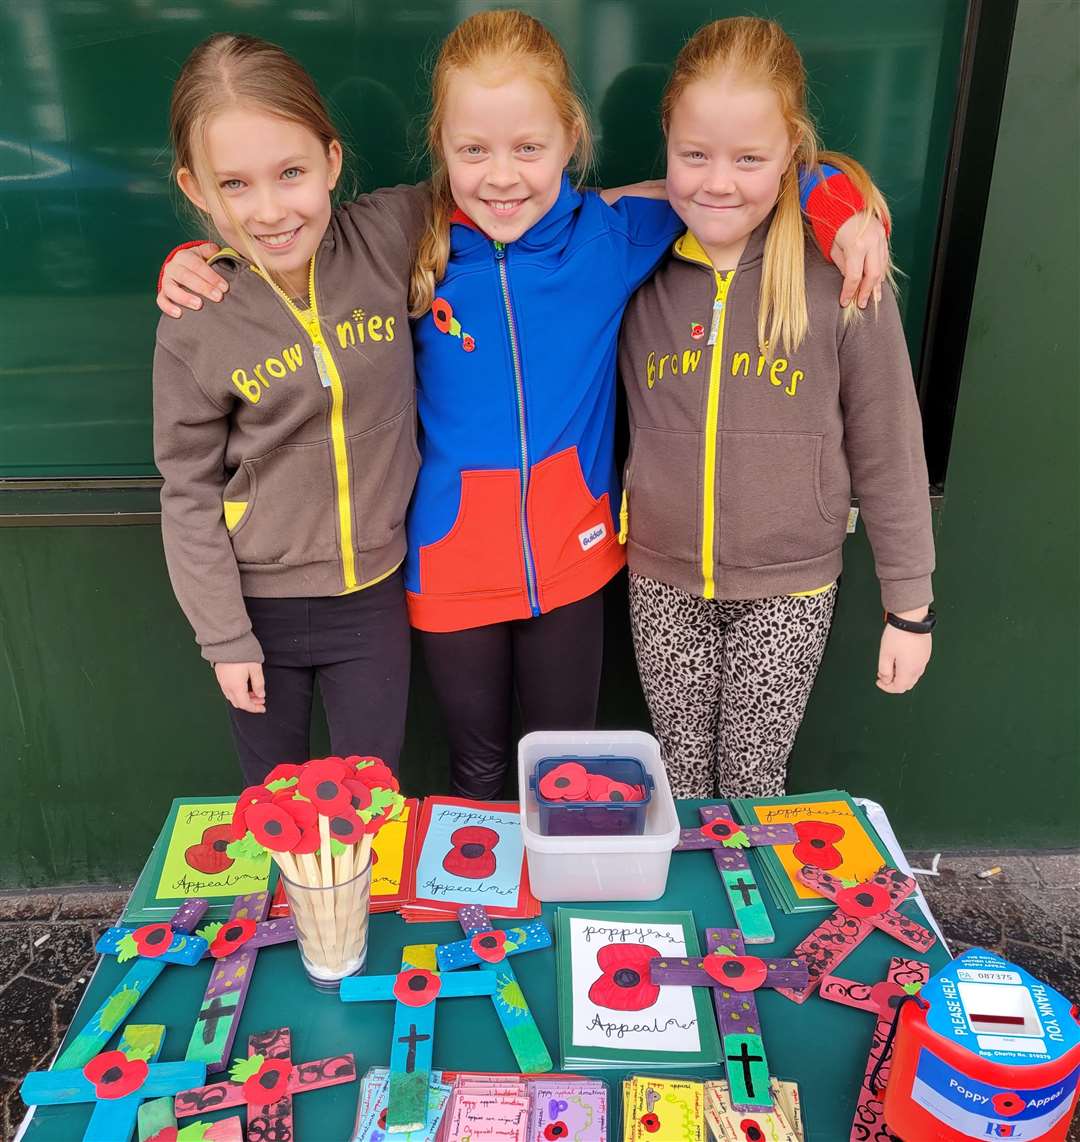 Jessica (middle), Alex (right), and their friend (left) who did not want to be named, from Dartford, created their own Poppy Appeal